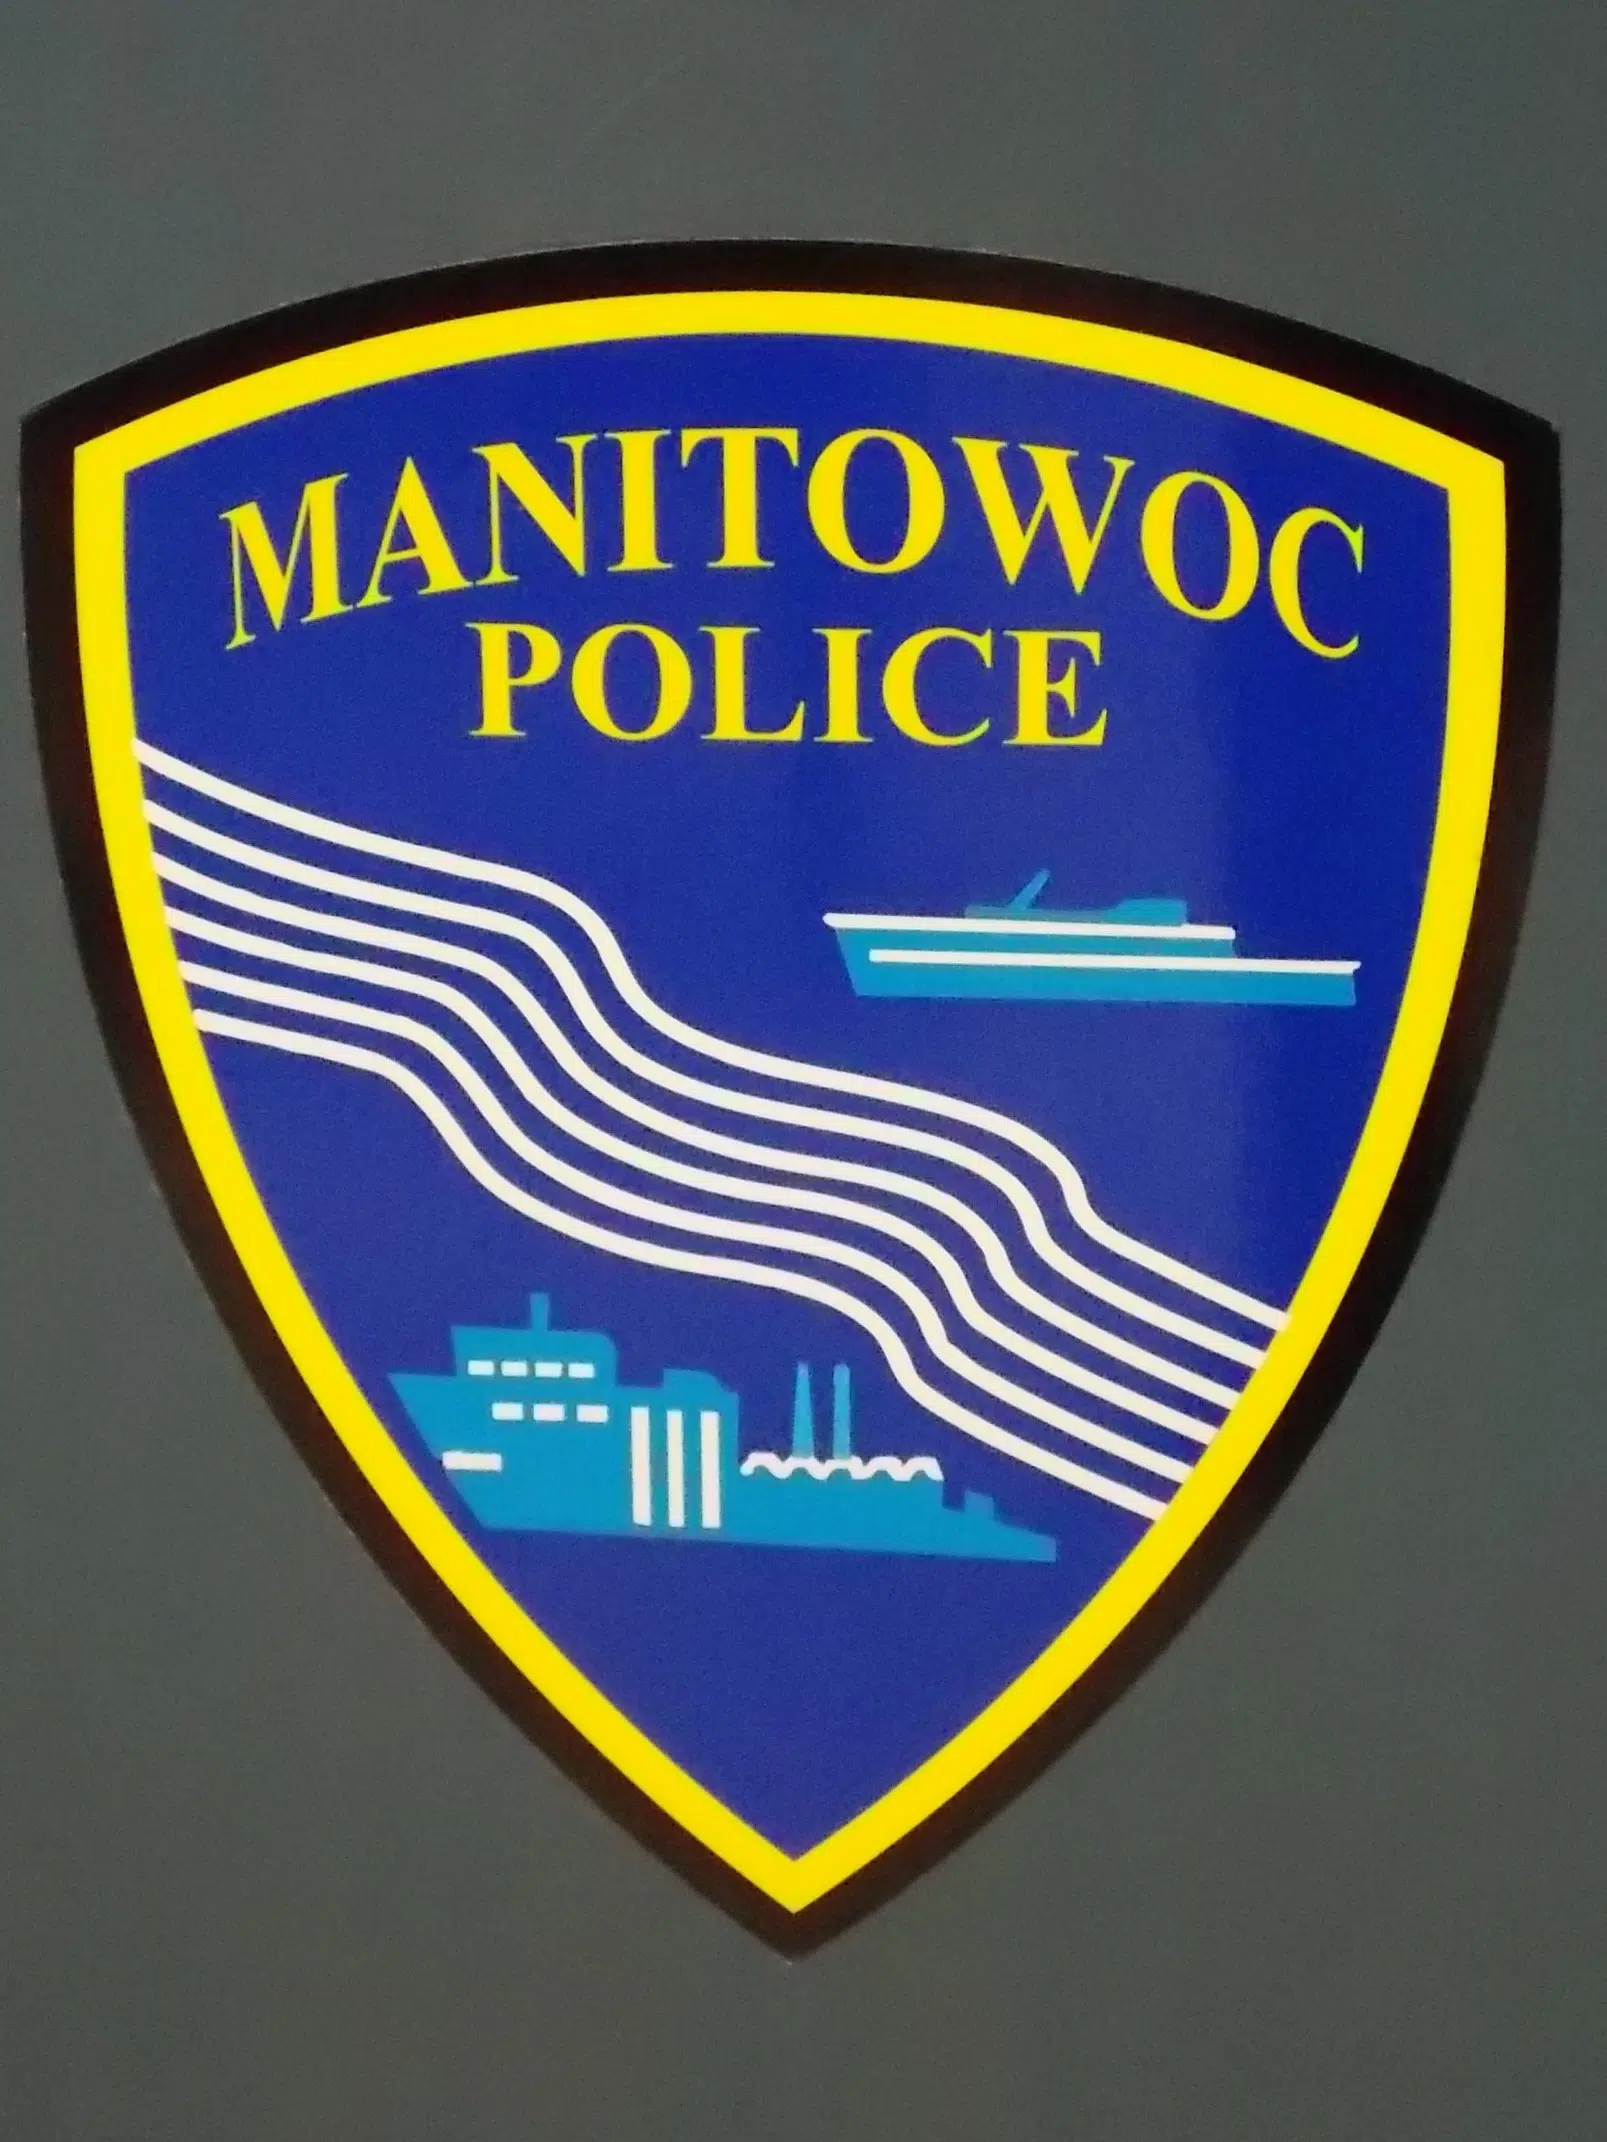 Update on Double Homicide Investigation in Manitowoc